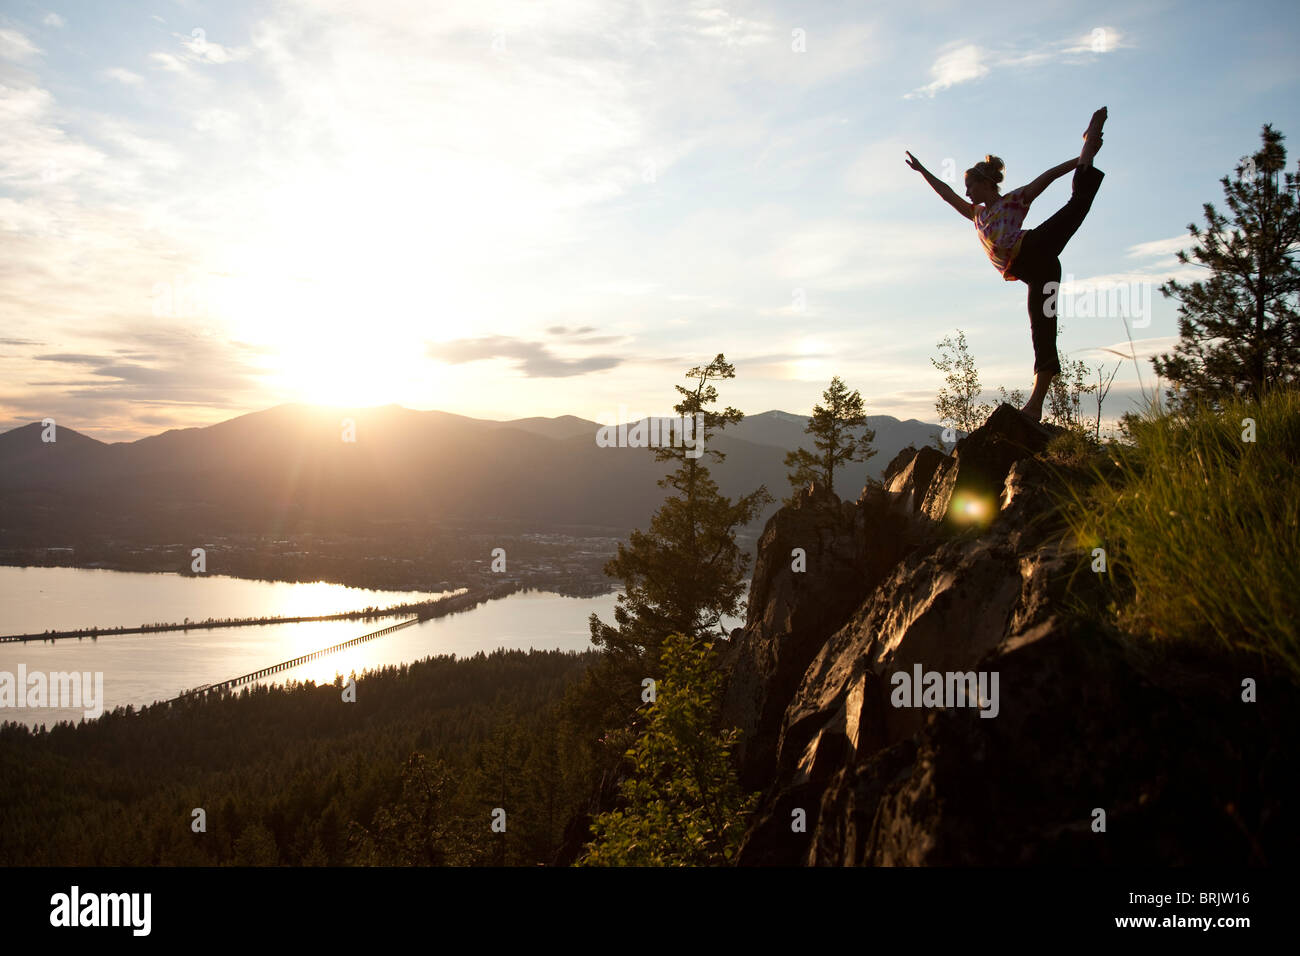 Young woman doing yoga at the top of a mountain overlooking a small town and large lake. Stock Photo